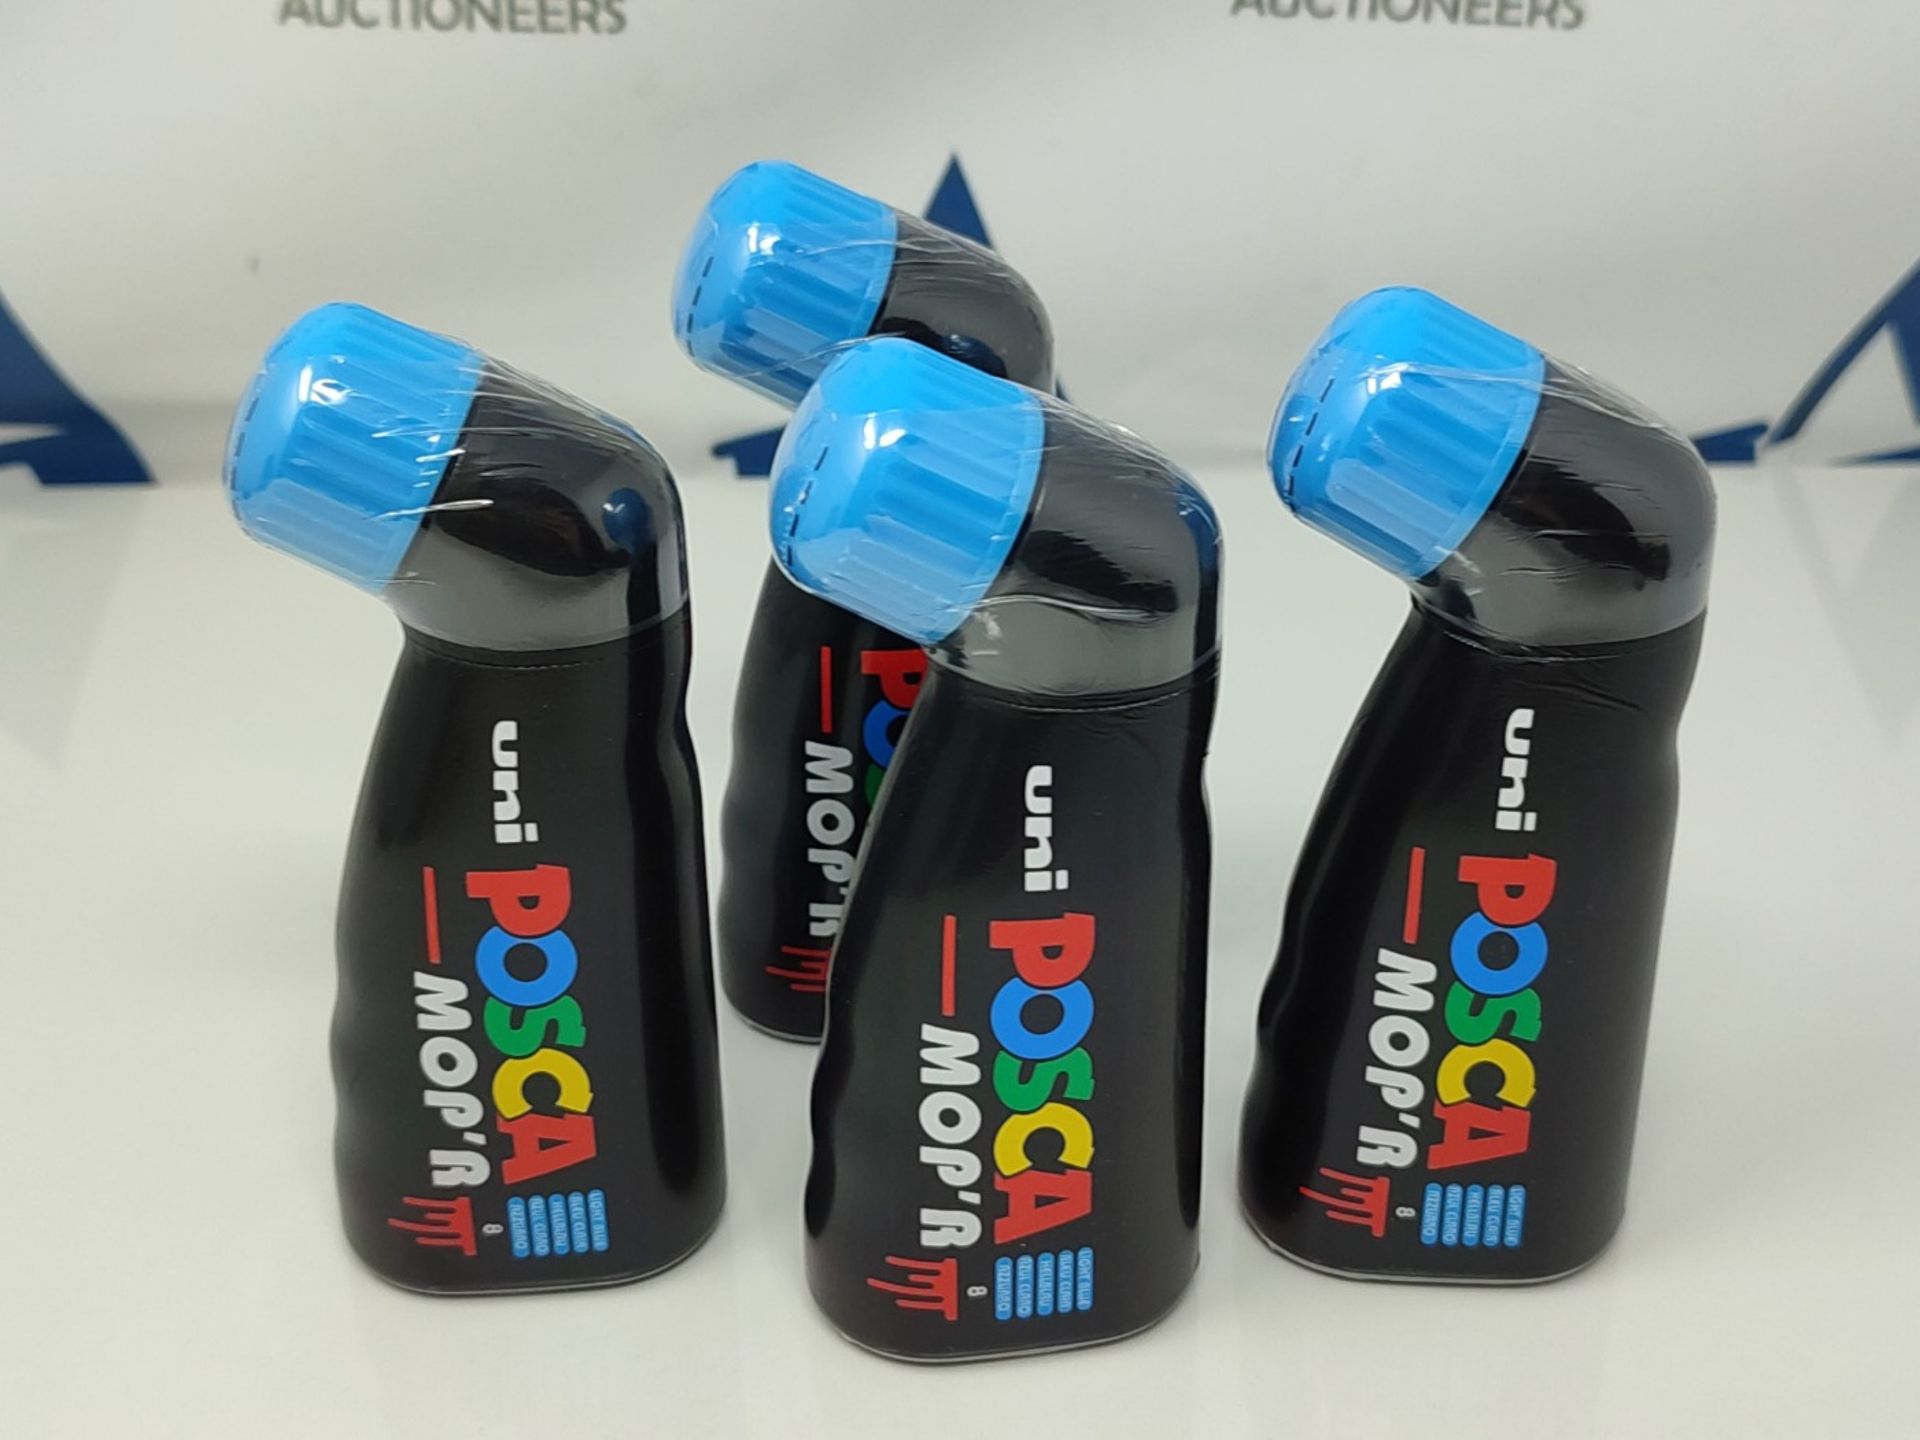 Posca MOPâ¬ "!R PCM-22 Water Based Permanent Paint Markers. 3mm - 19mm Round Tip fo - Image 2 of 2